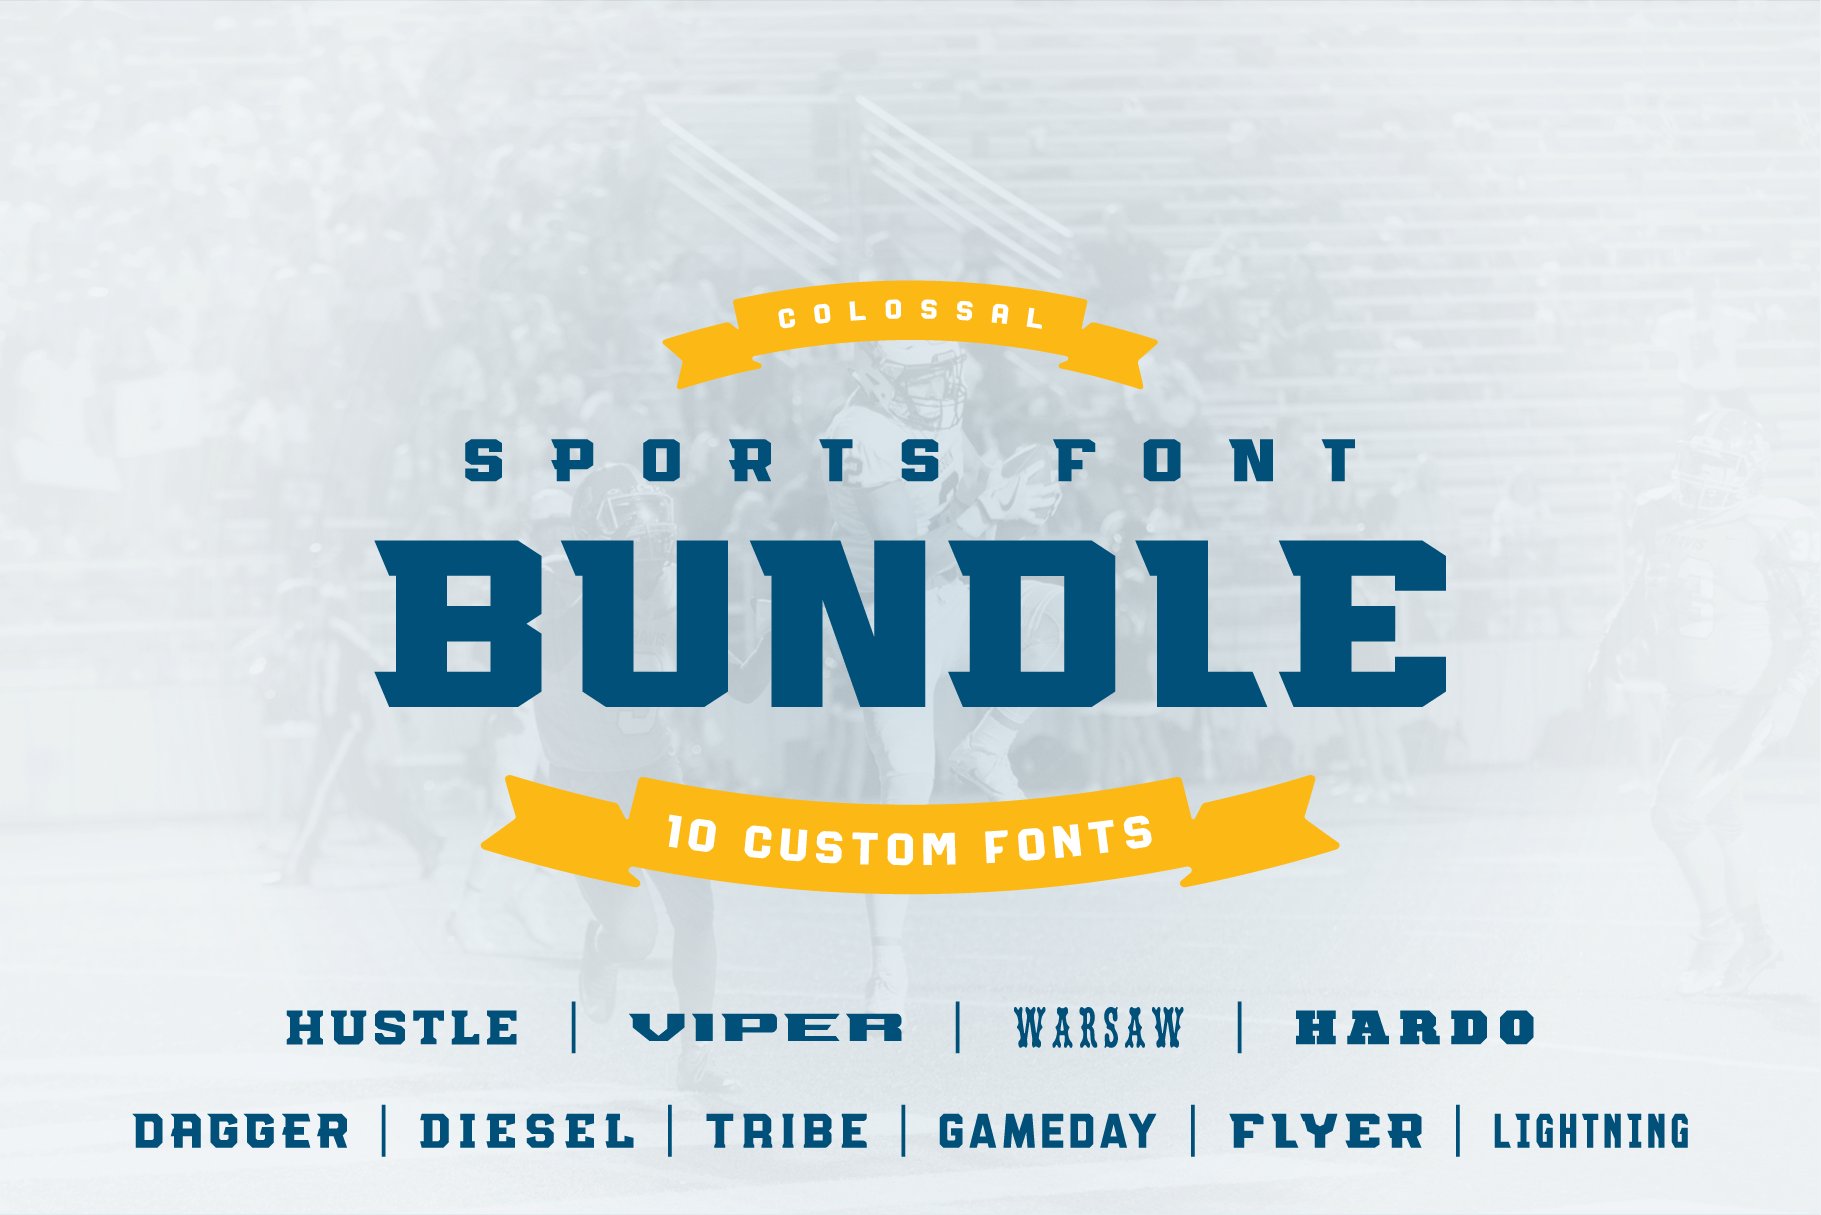 Colossal Sports Font Bundle cover image.